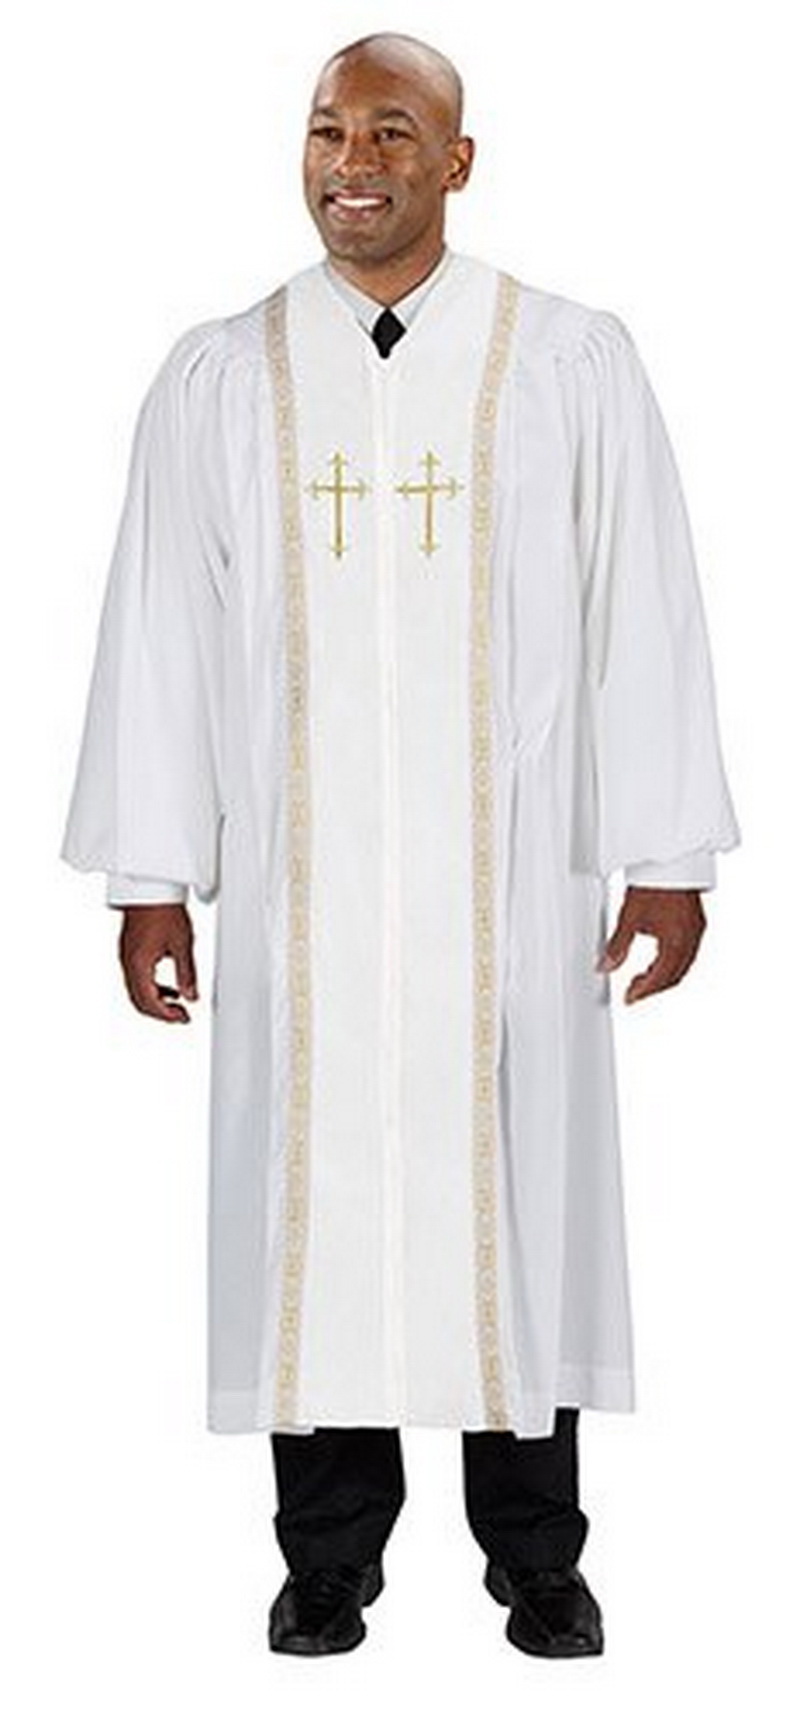 Pulpit Robe - Black with Red Crosses